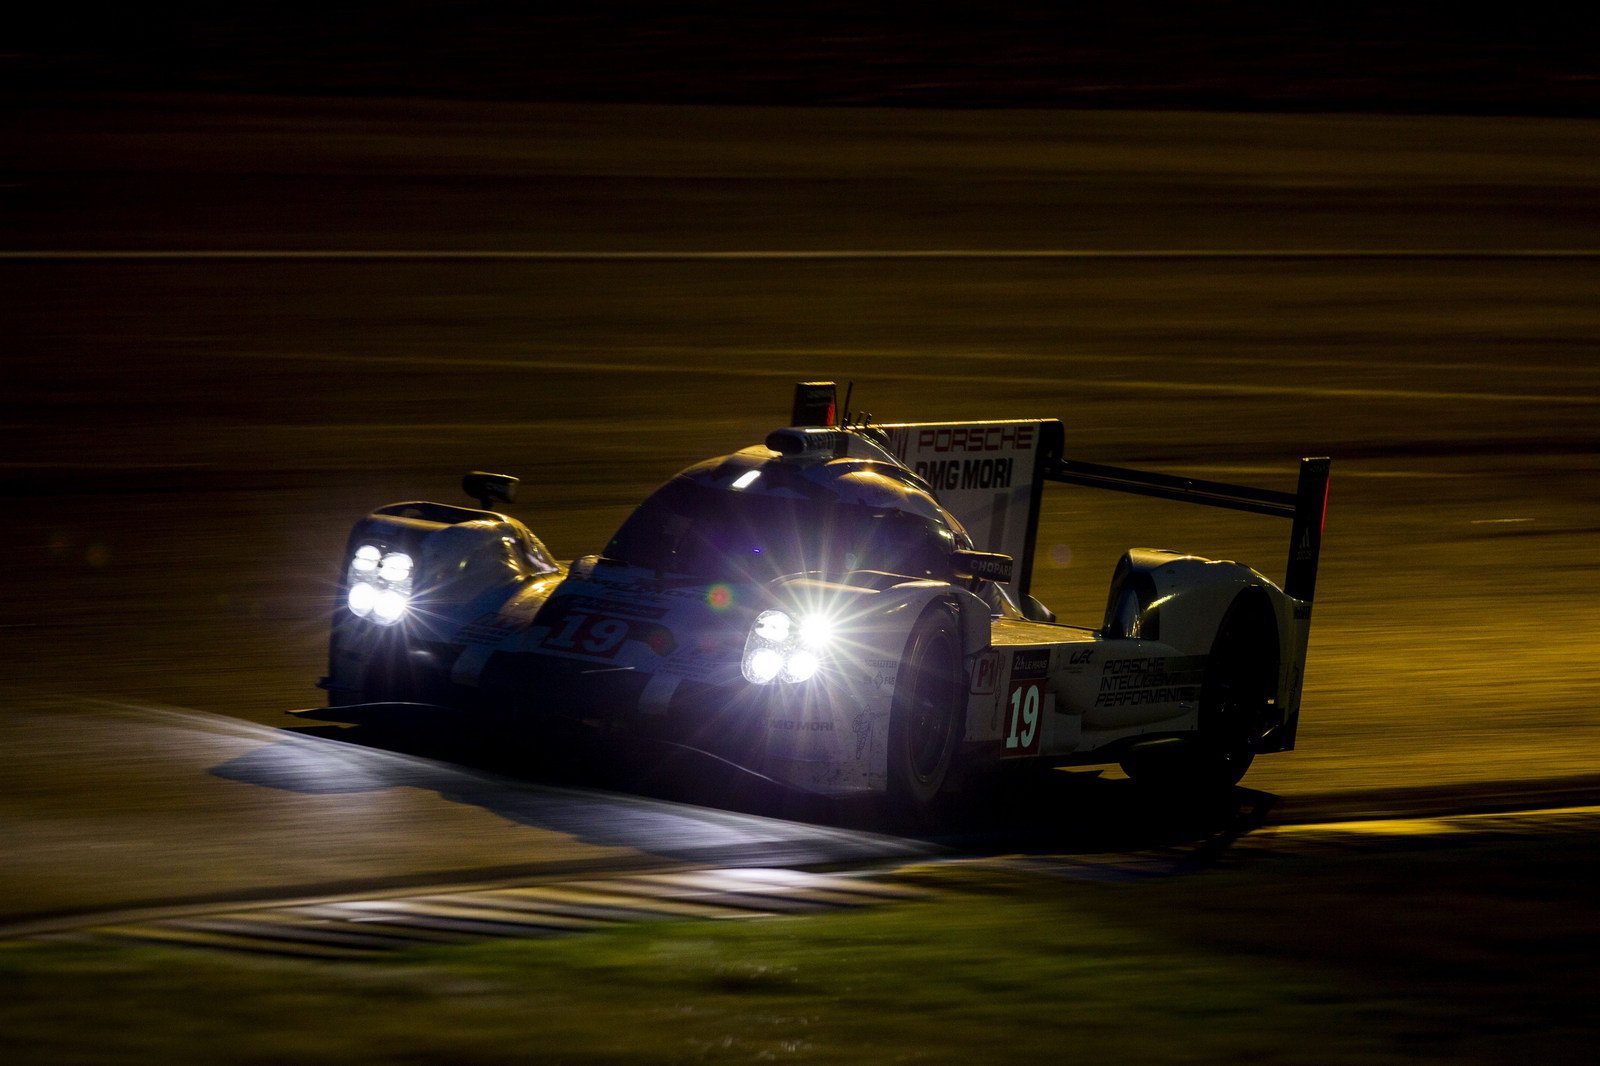 LED headlamps on high speed race cars during Le Mans at night